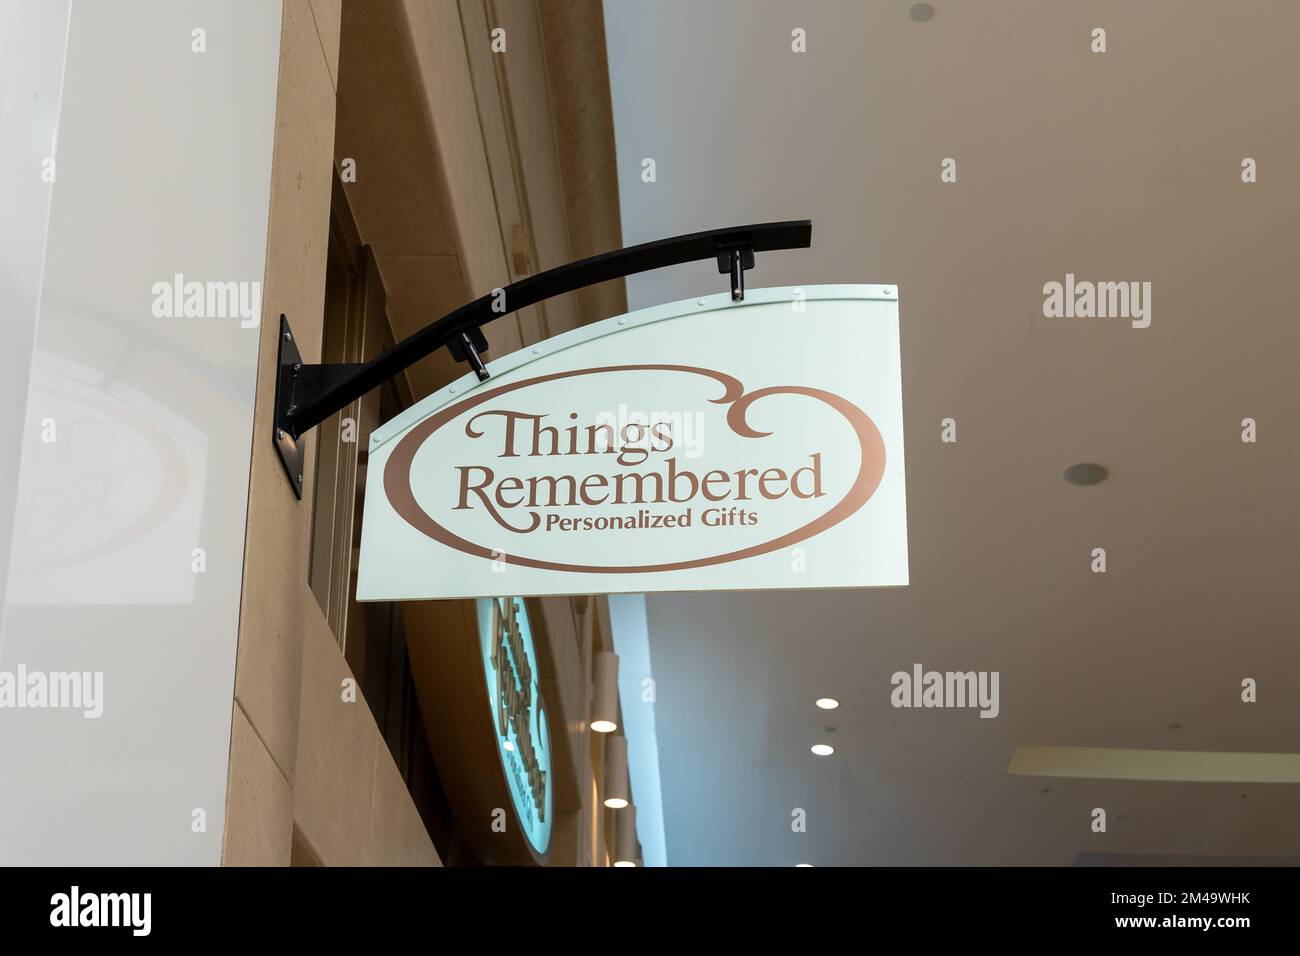 Houston, Texas, USA - March 6, 2022: A Things Remembered store projecting sign in a shopping mall. Stock Photo